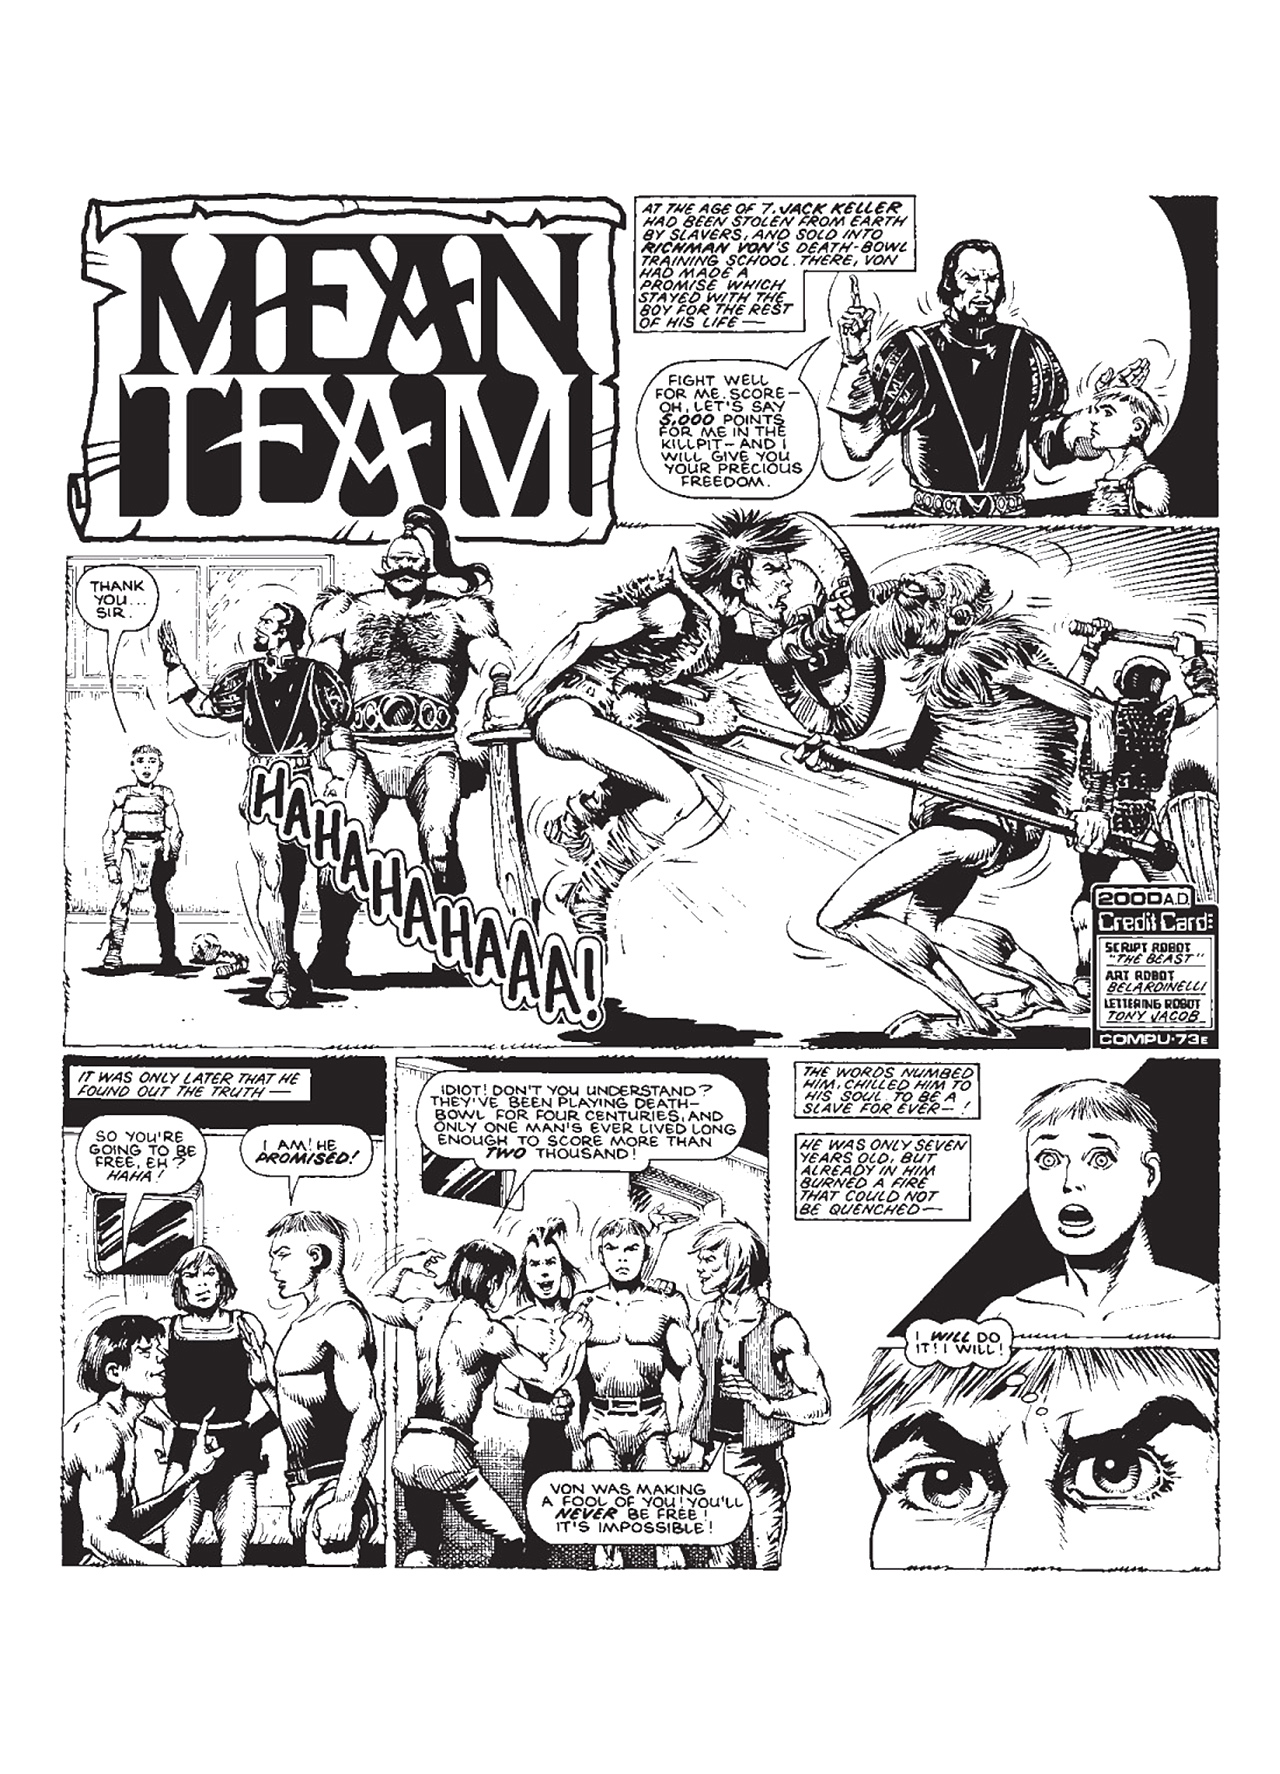 Read online Mean Team comic -  Issue # TPB - 88